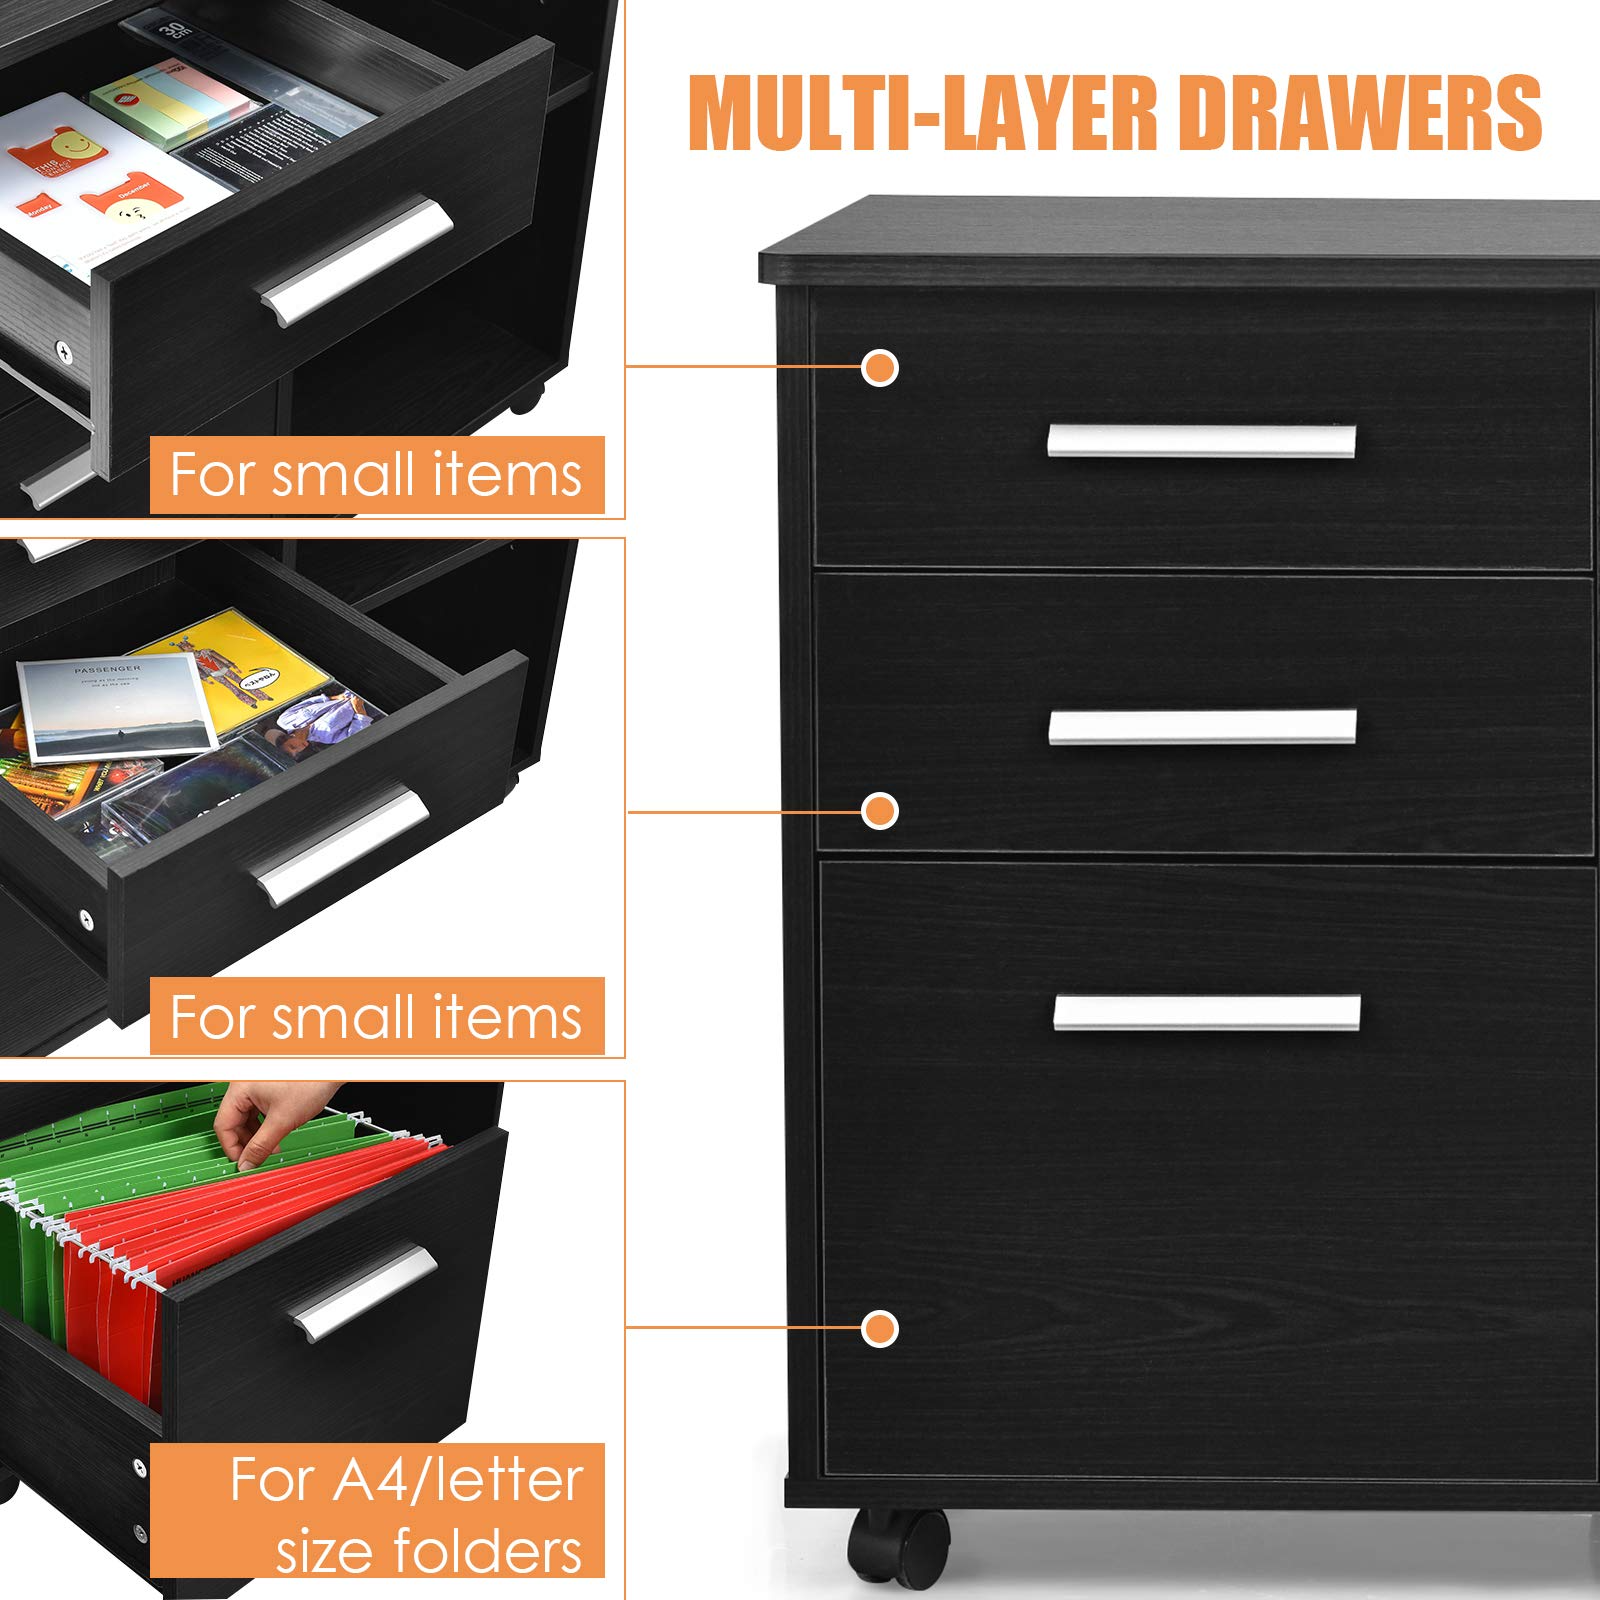 3-Drawer File Cabinet | Mobile Lateral Filing Cabinet with Wheels